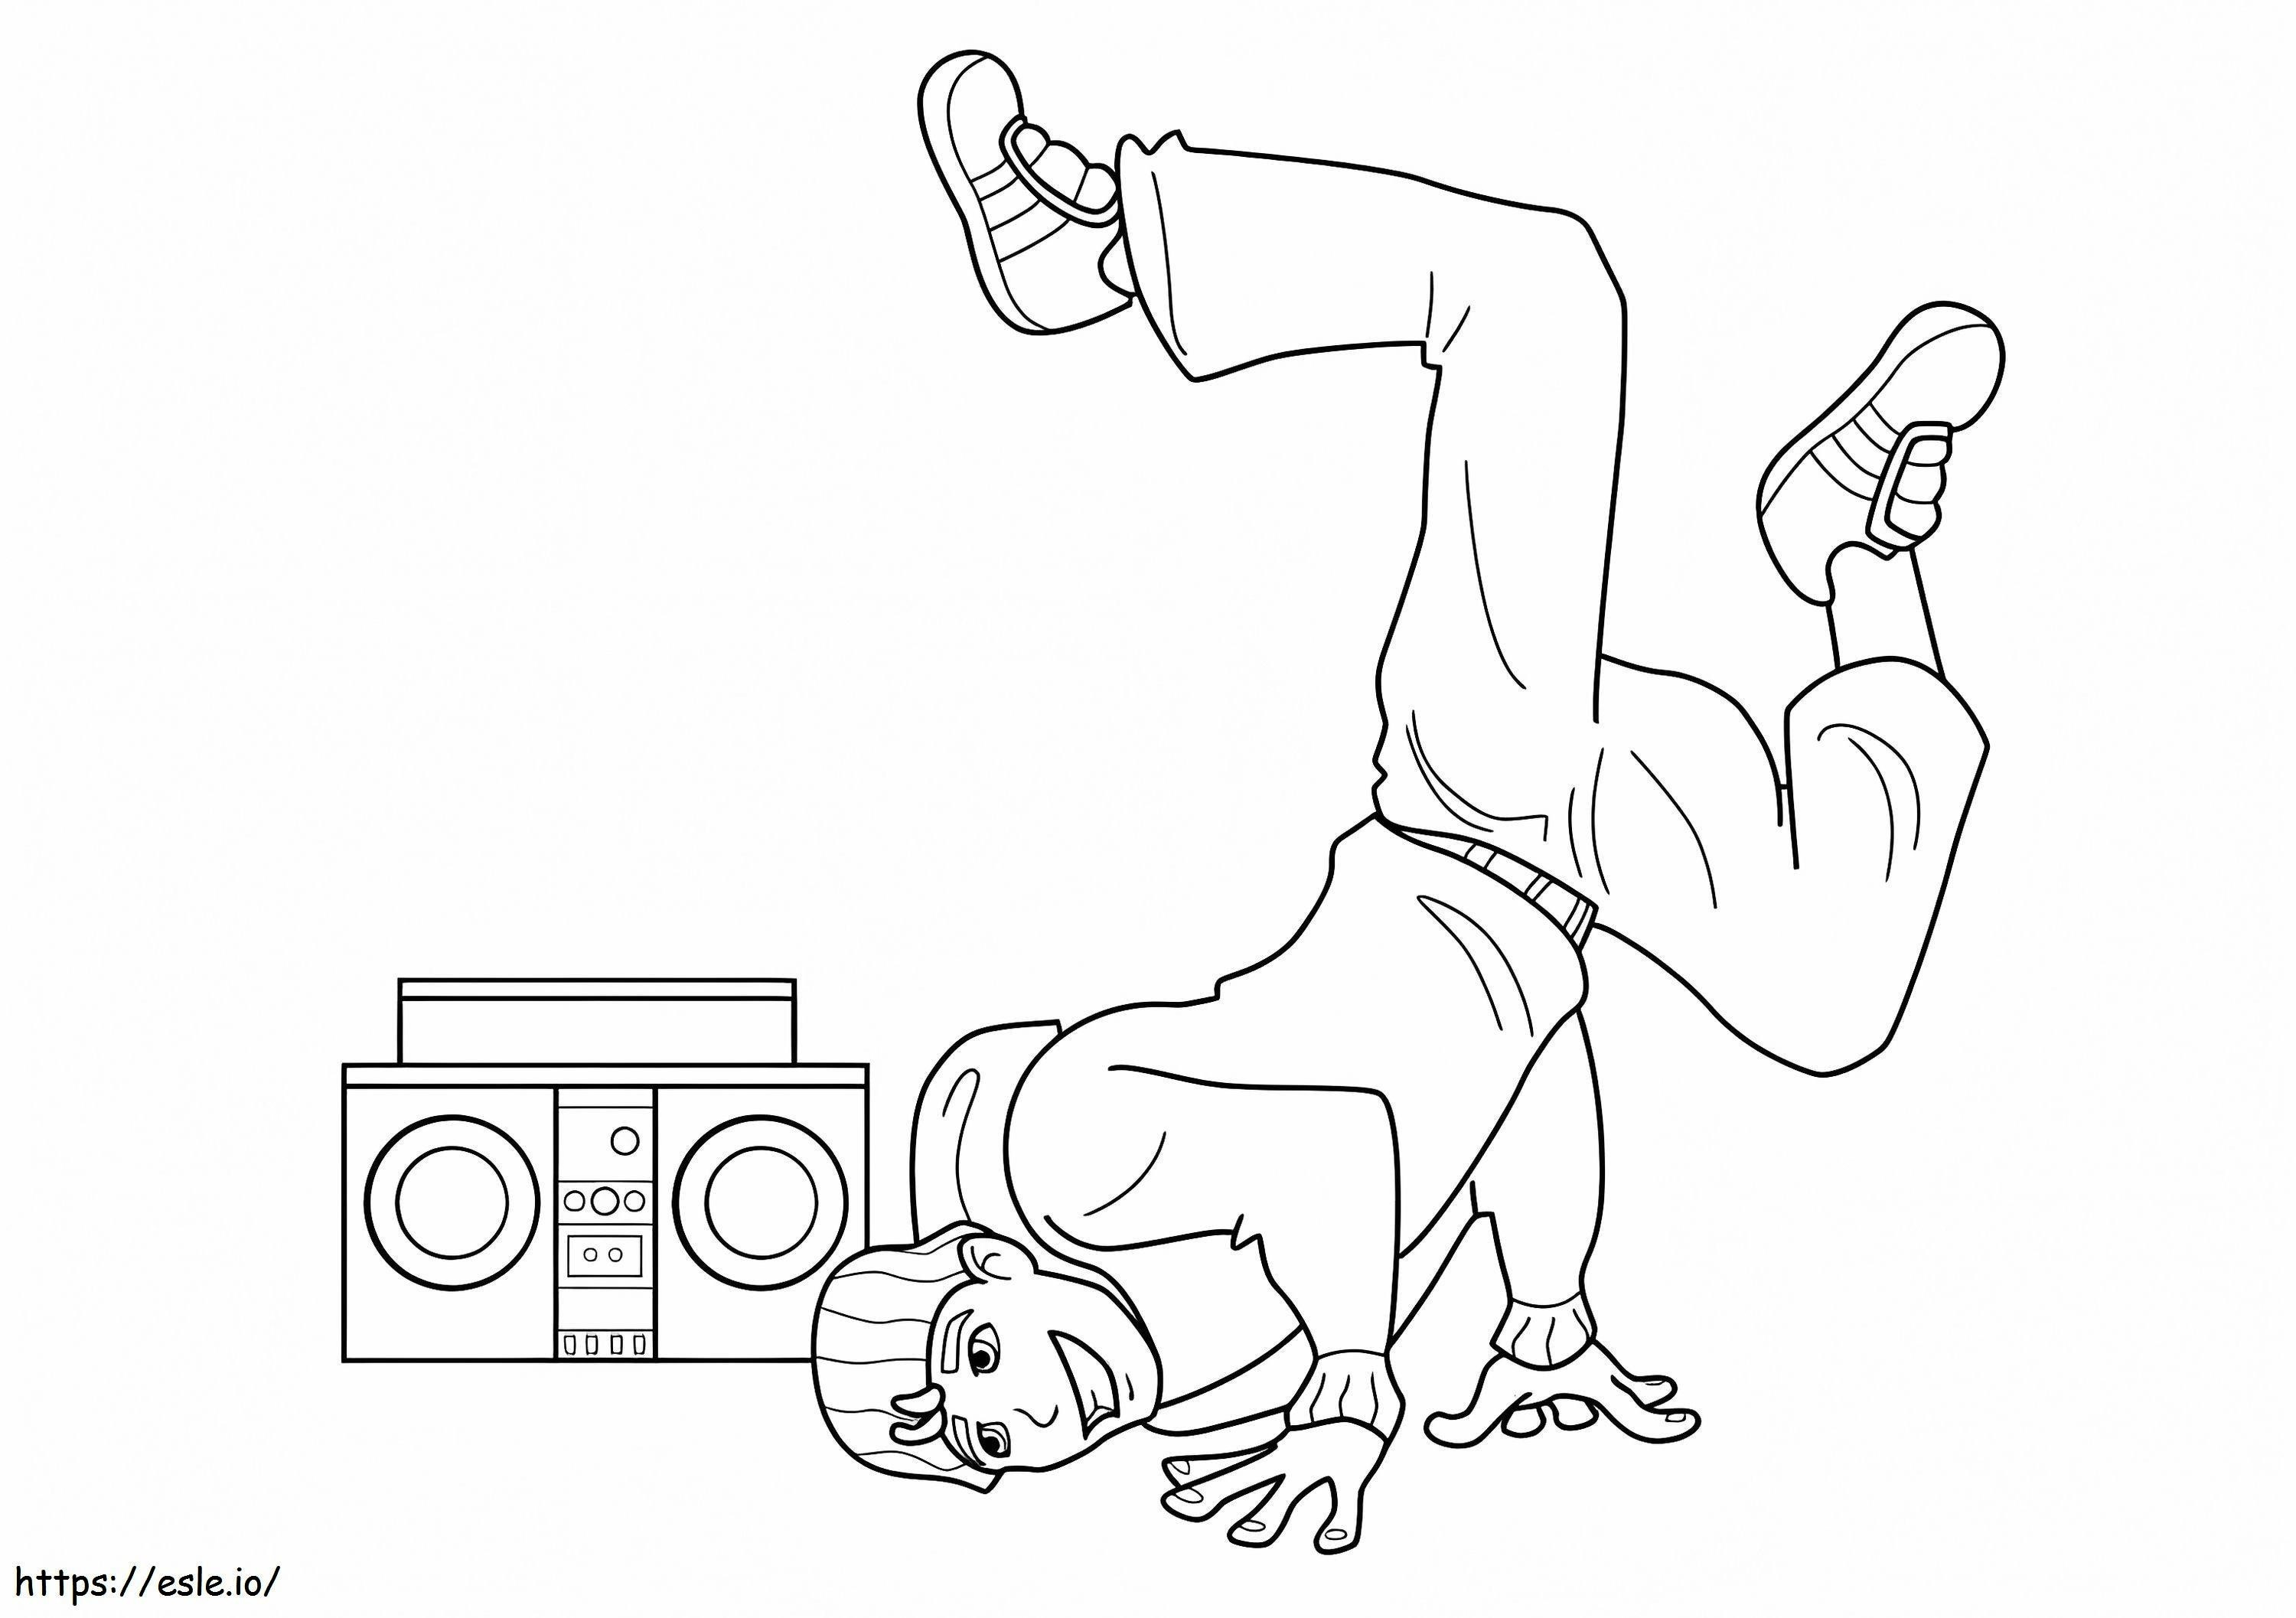 Awesome Dancer coloring page